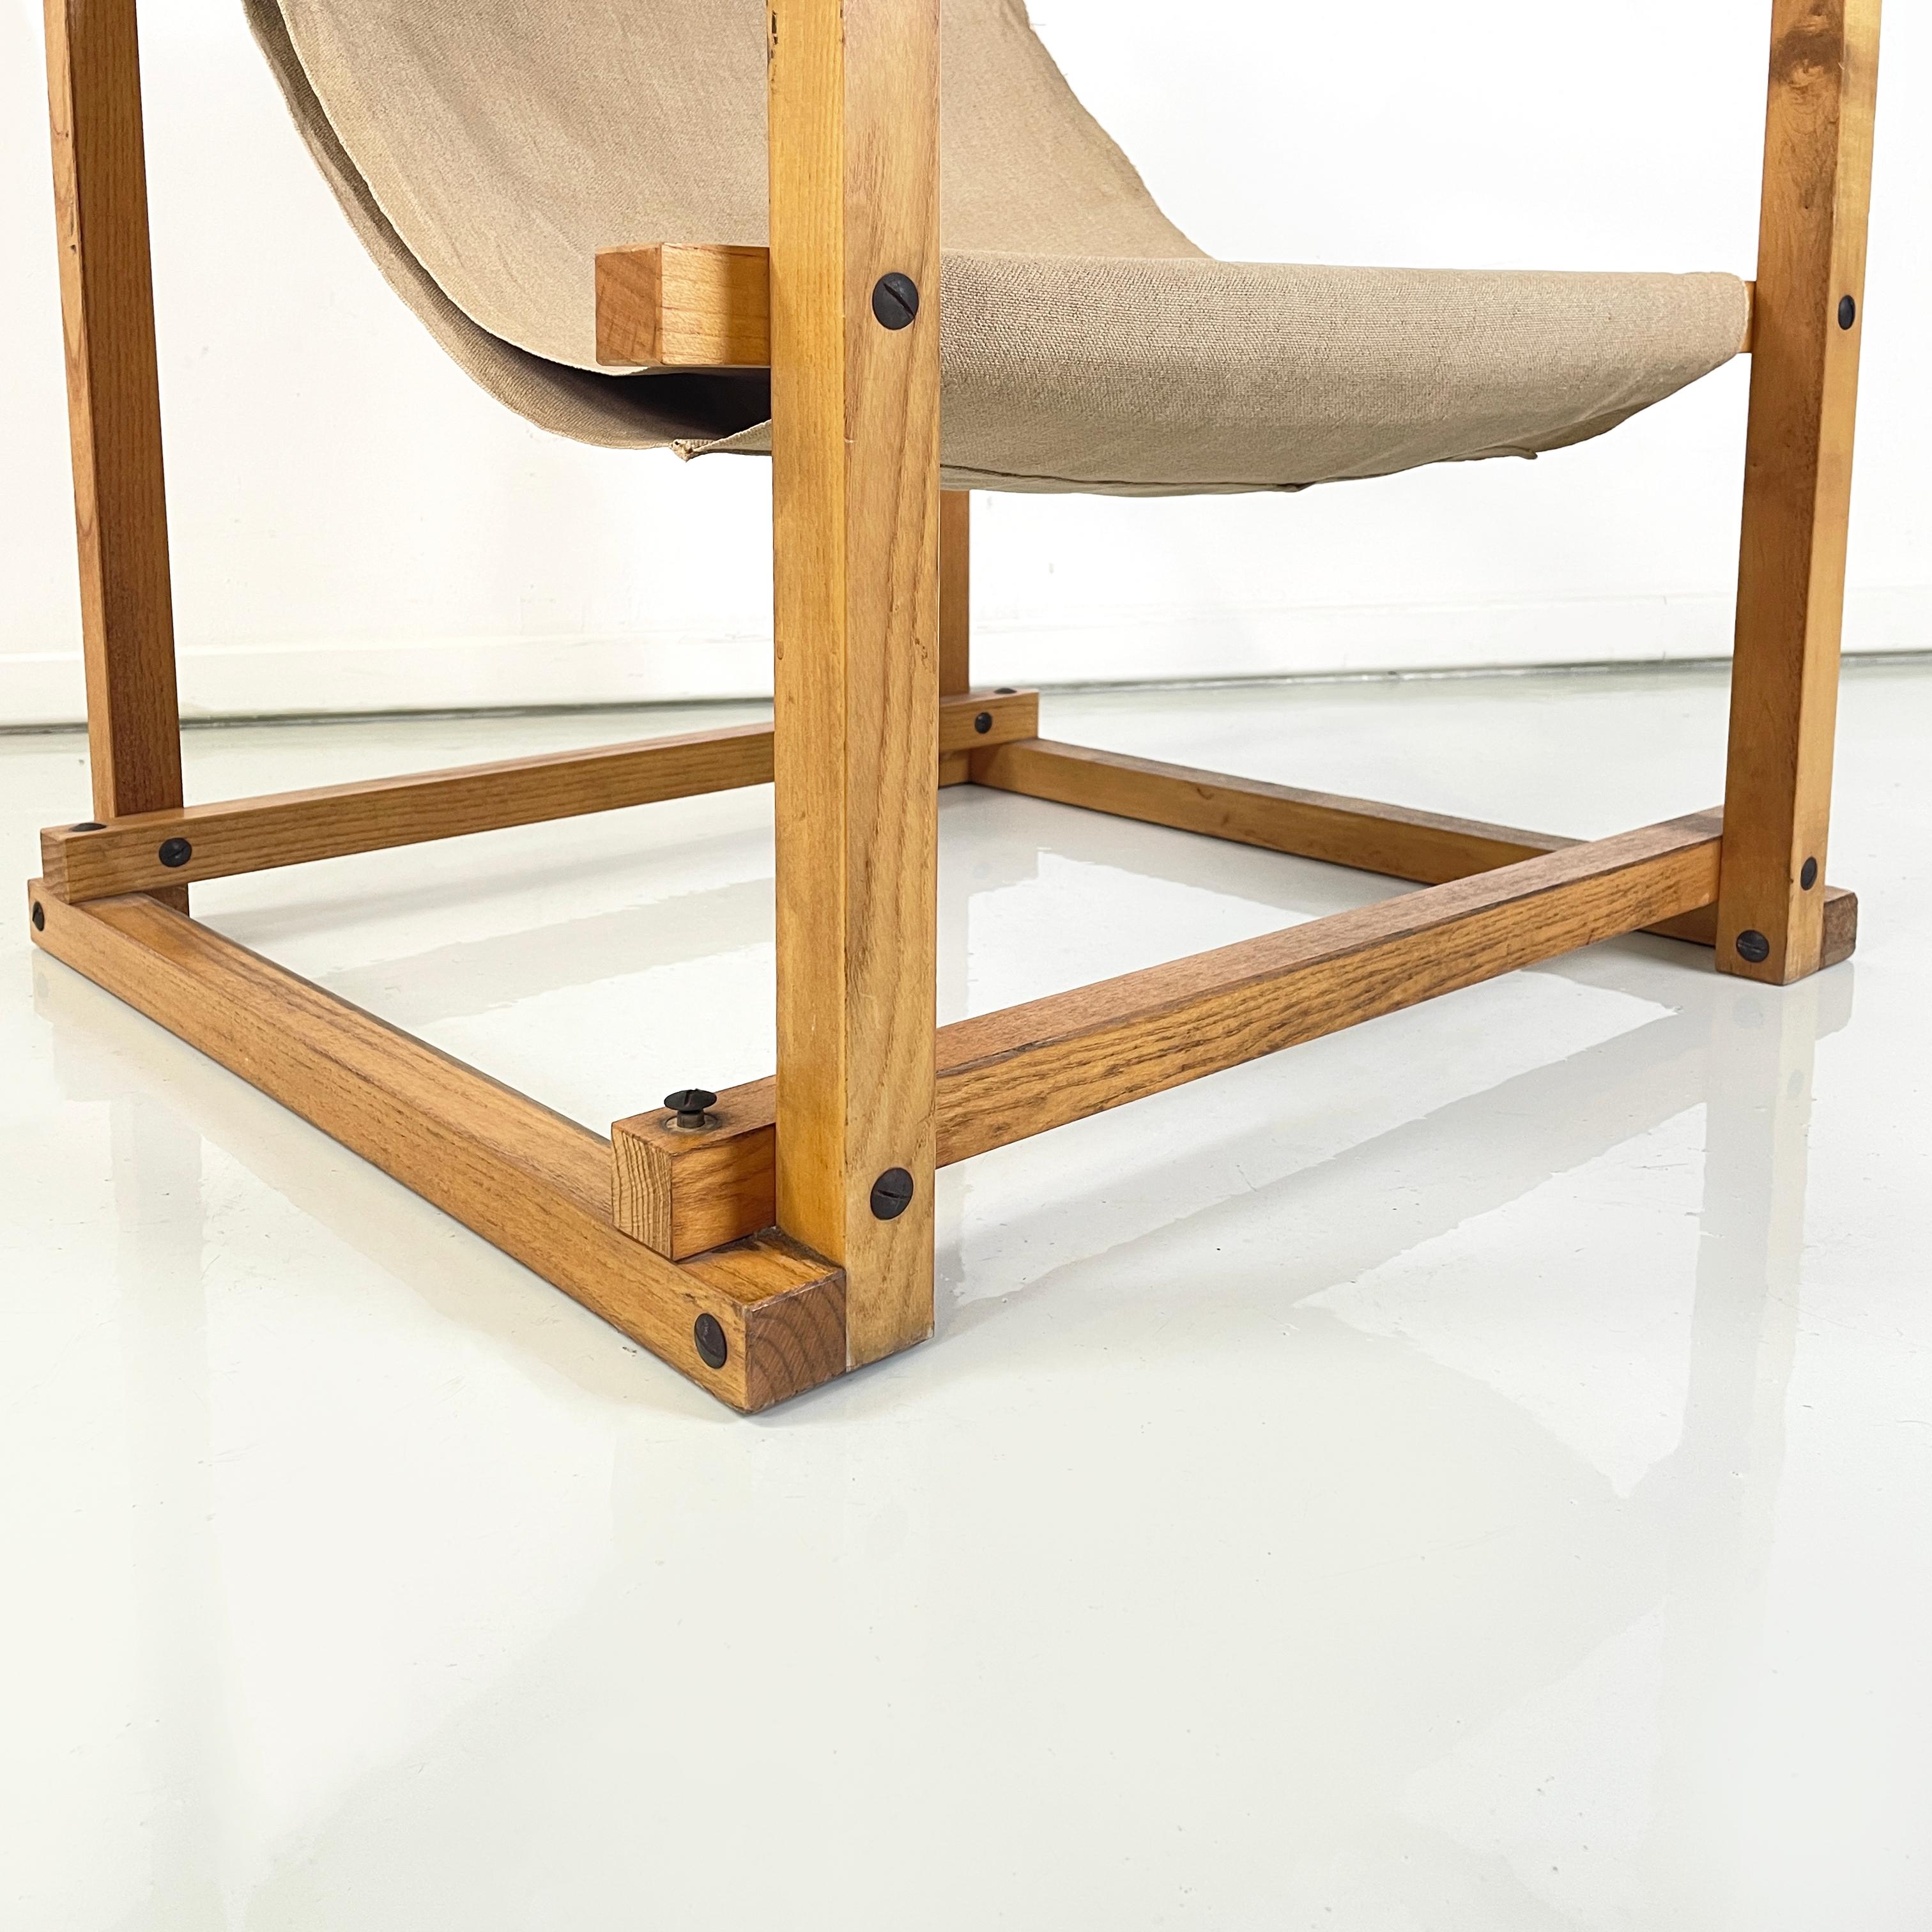 Italian mid-century modern Wood armchair with beige fabric by Pino Pedano, 1970s For Sale 8